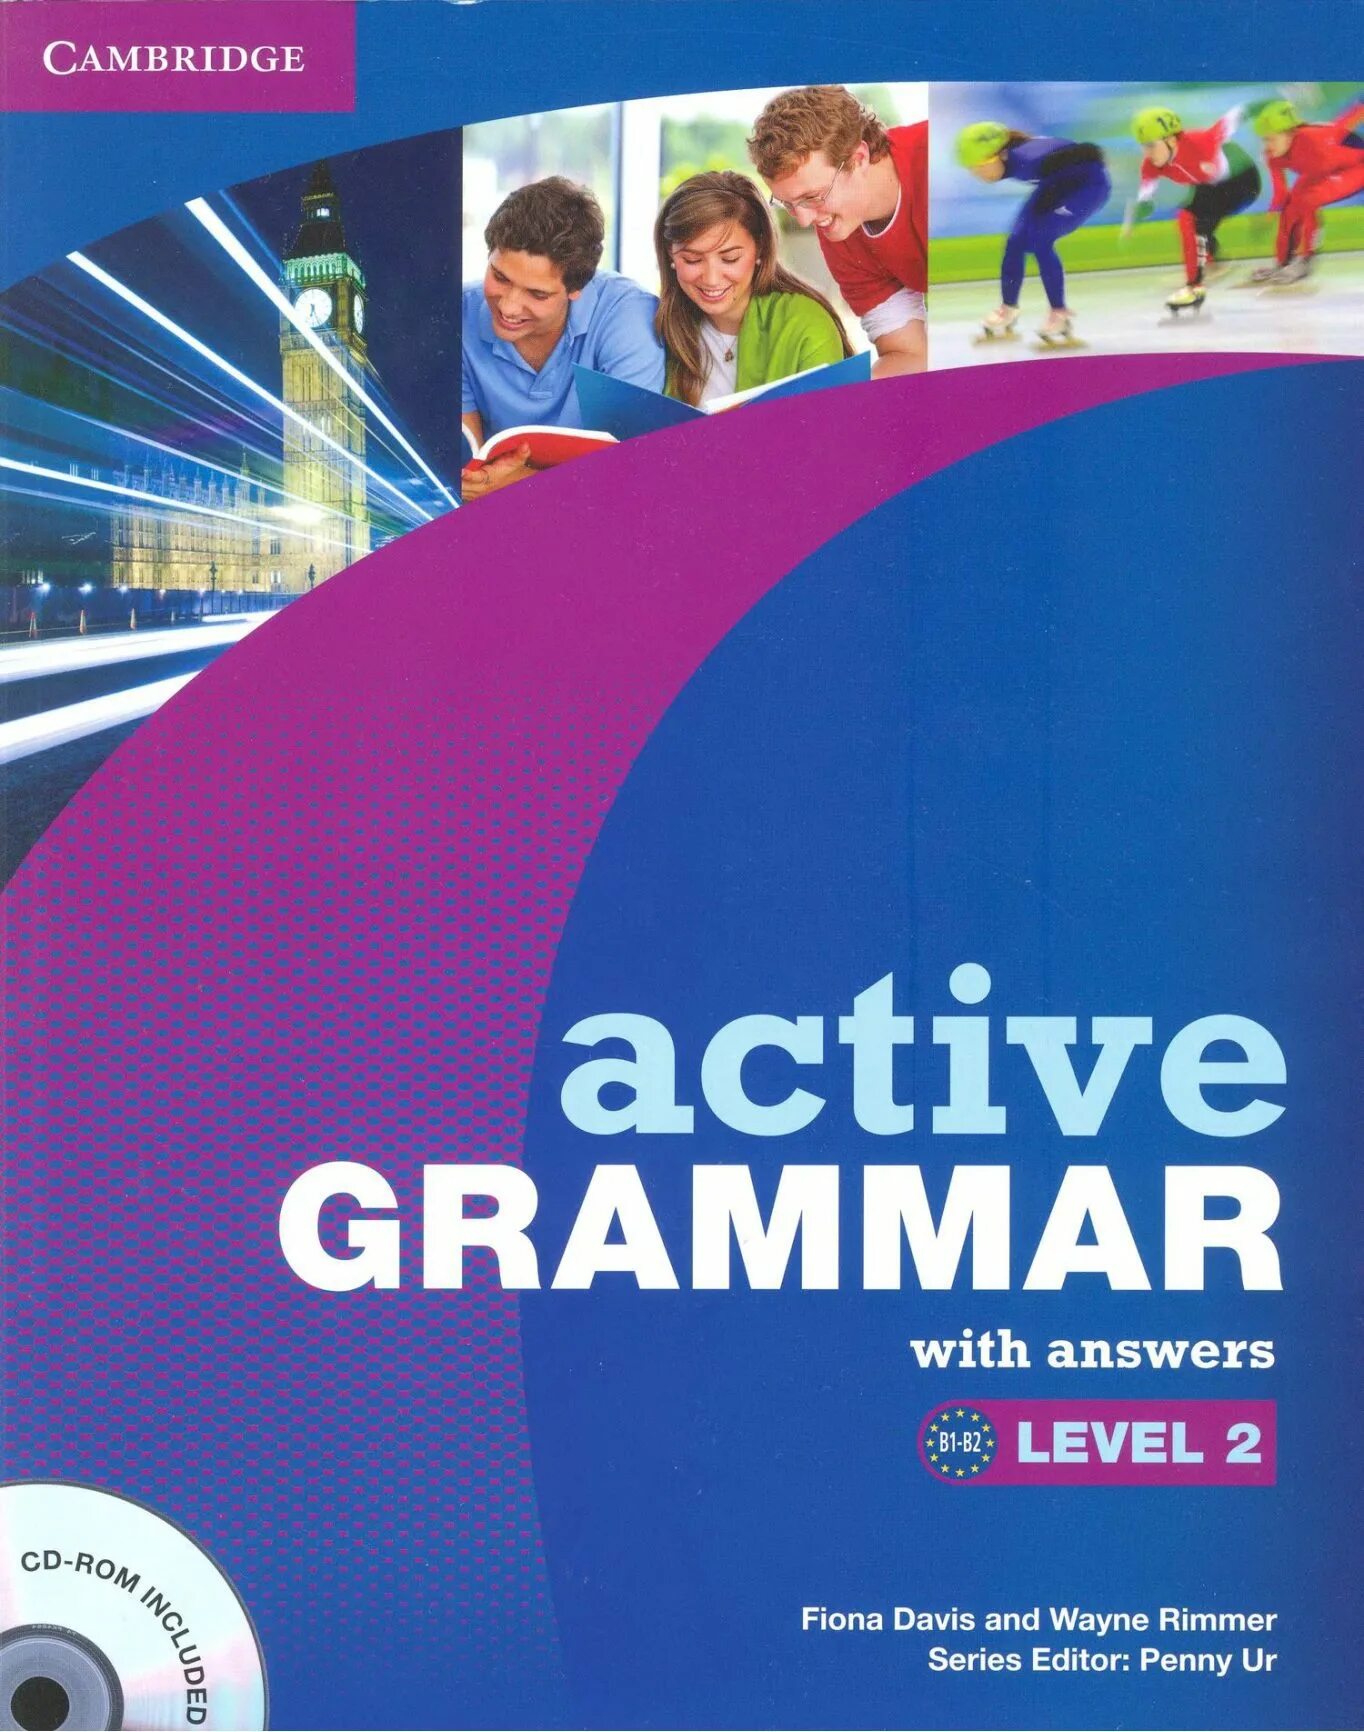 Davis Fiona "Active Grammar: Level 2: with answers (+ CD-ROM)". Active Grammar 2. Active Grammar Level 2. Cambridge Active Grammar. Level 2 book